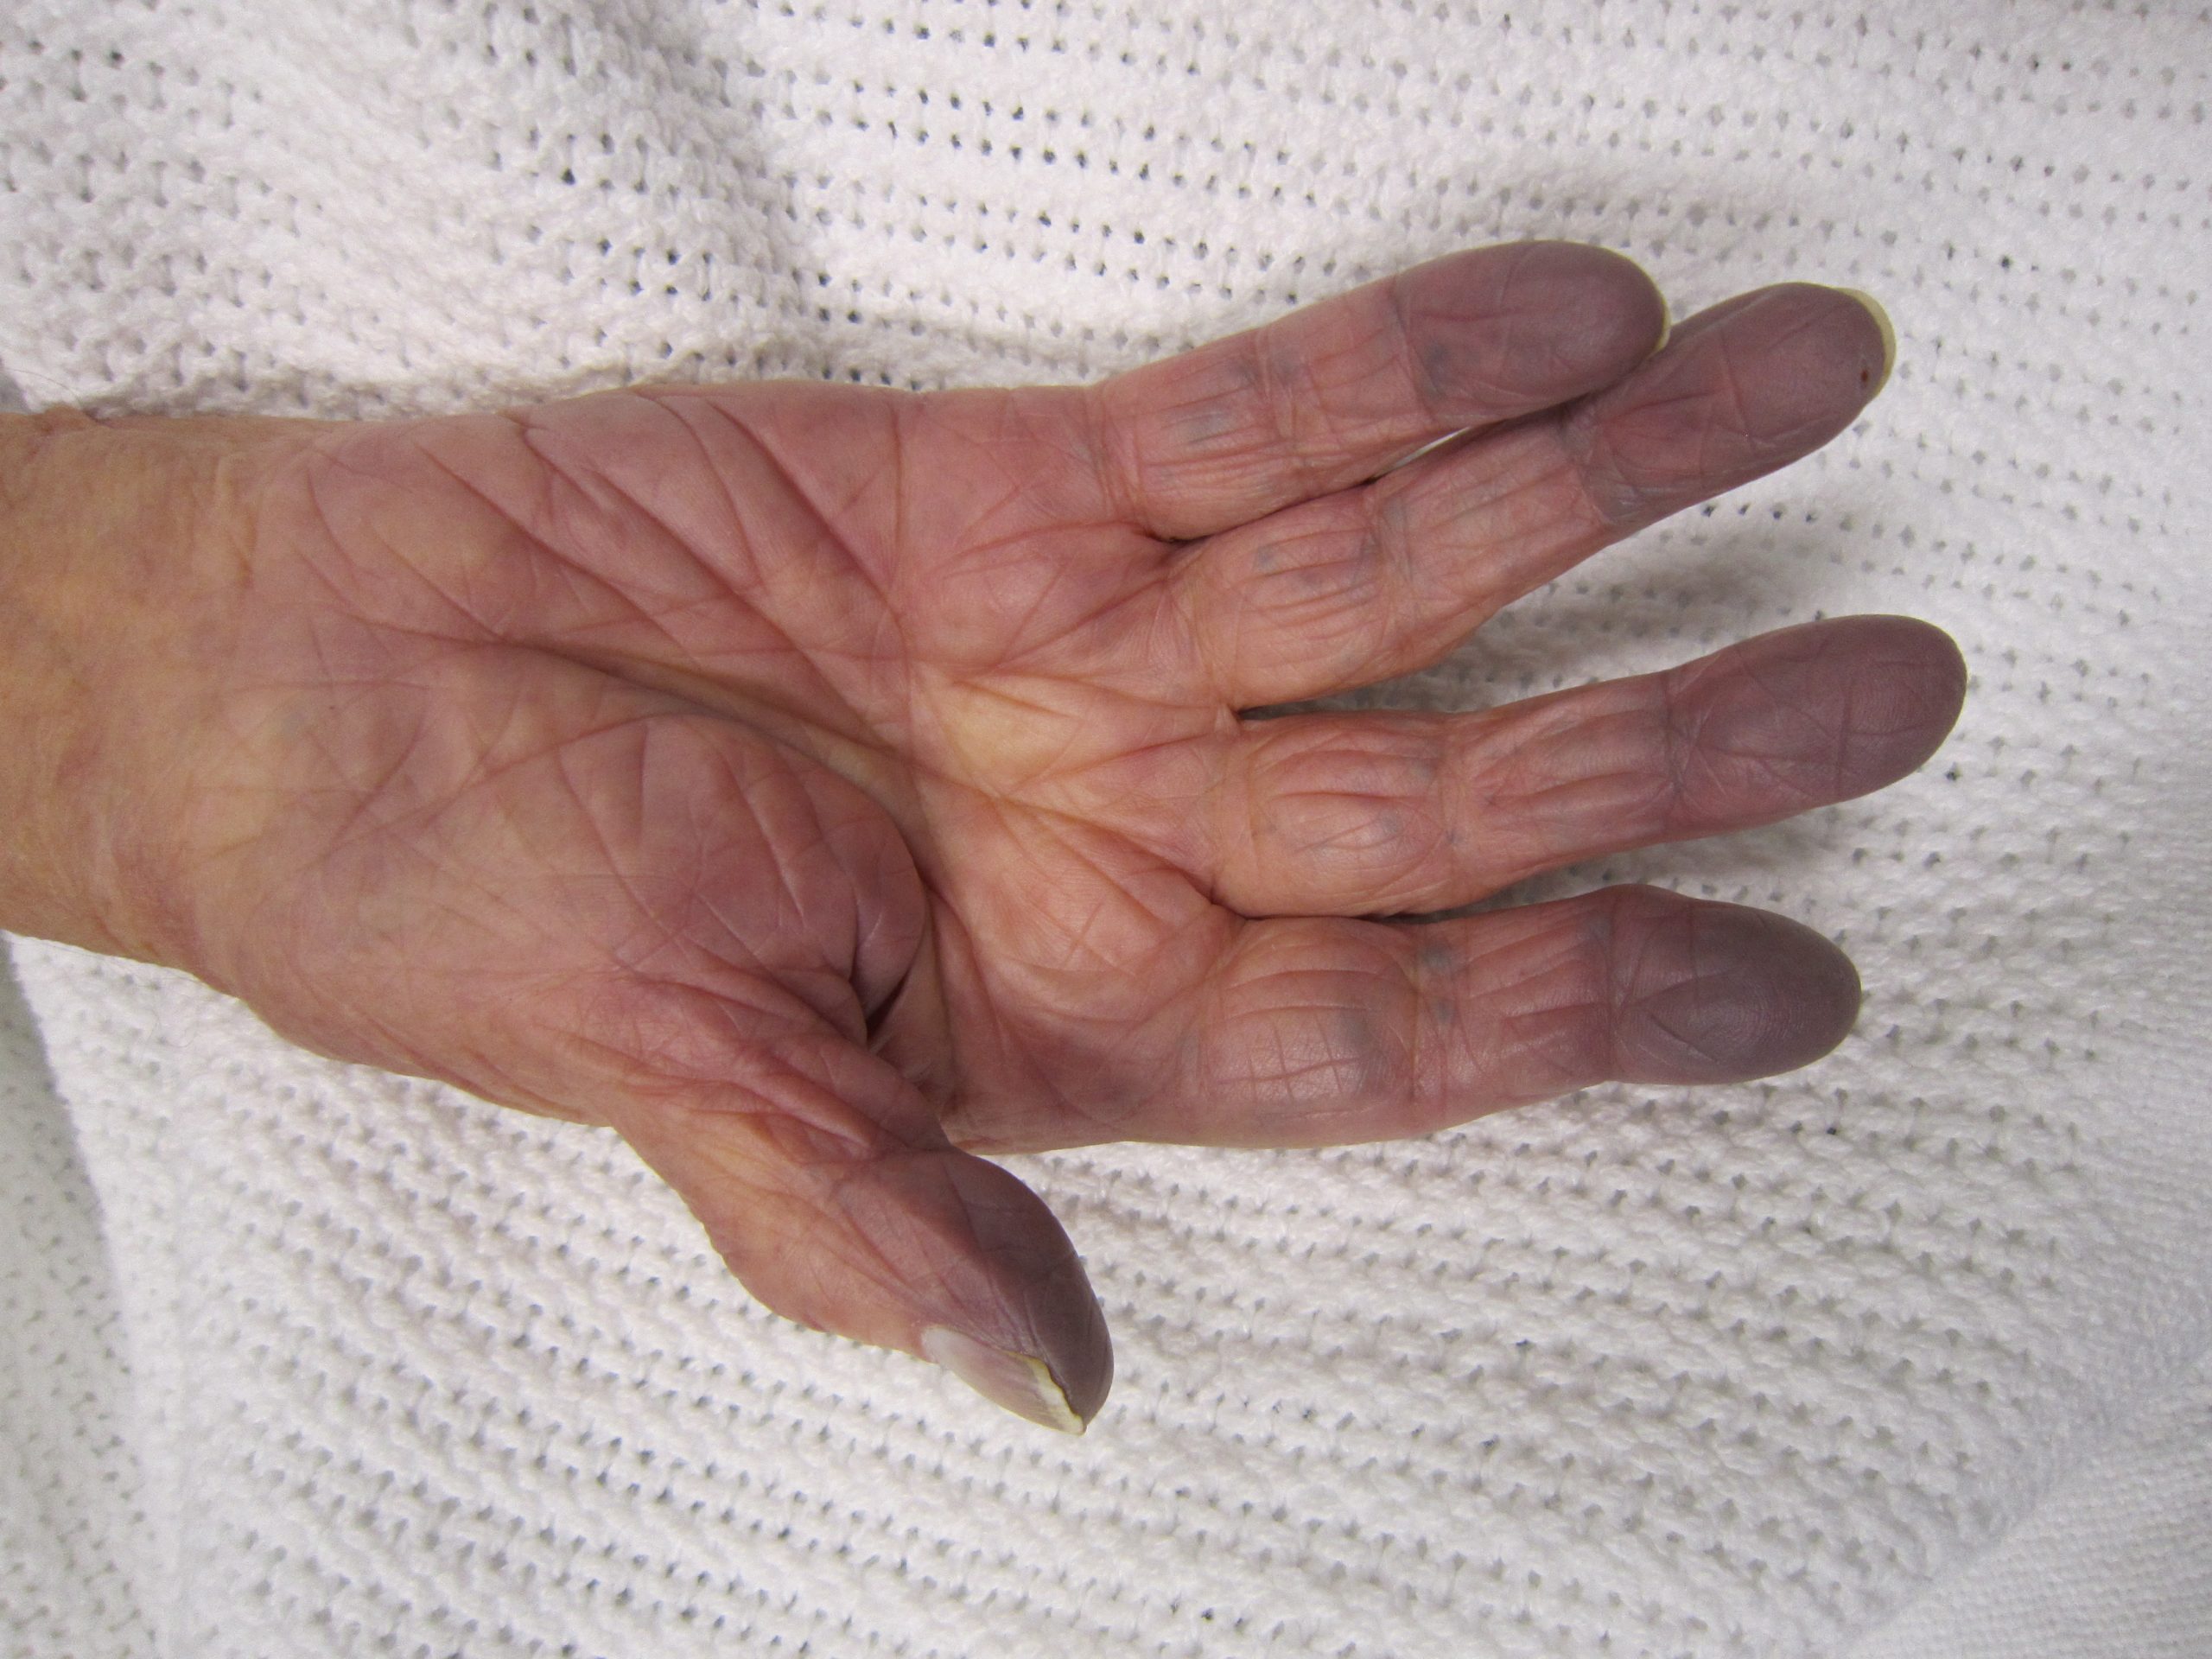 Photo showing hand with cyanosis on fingertips